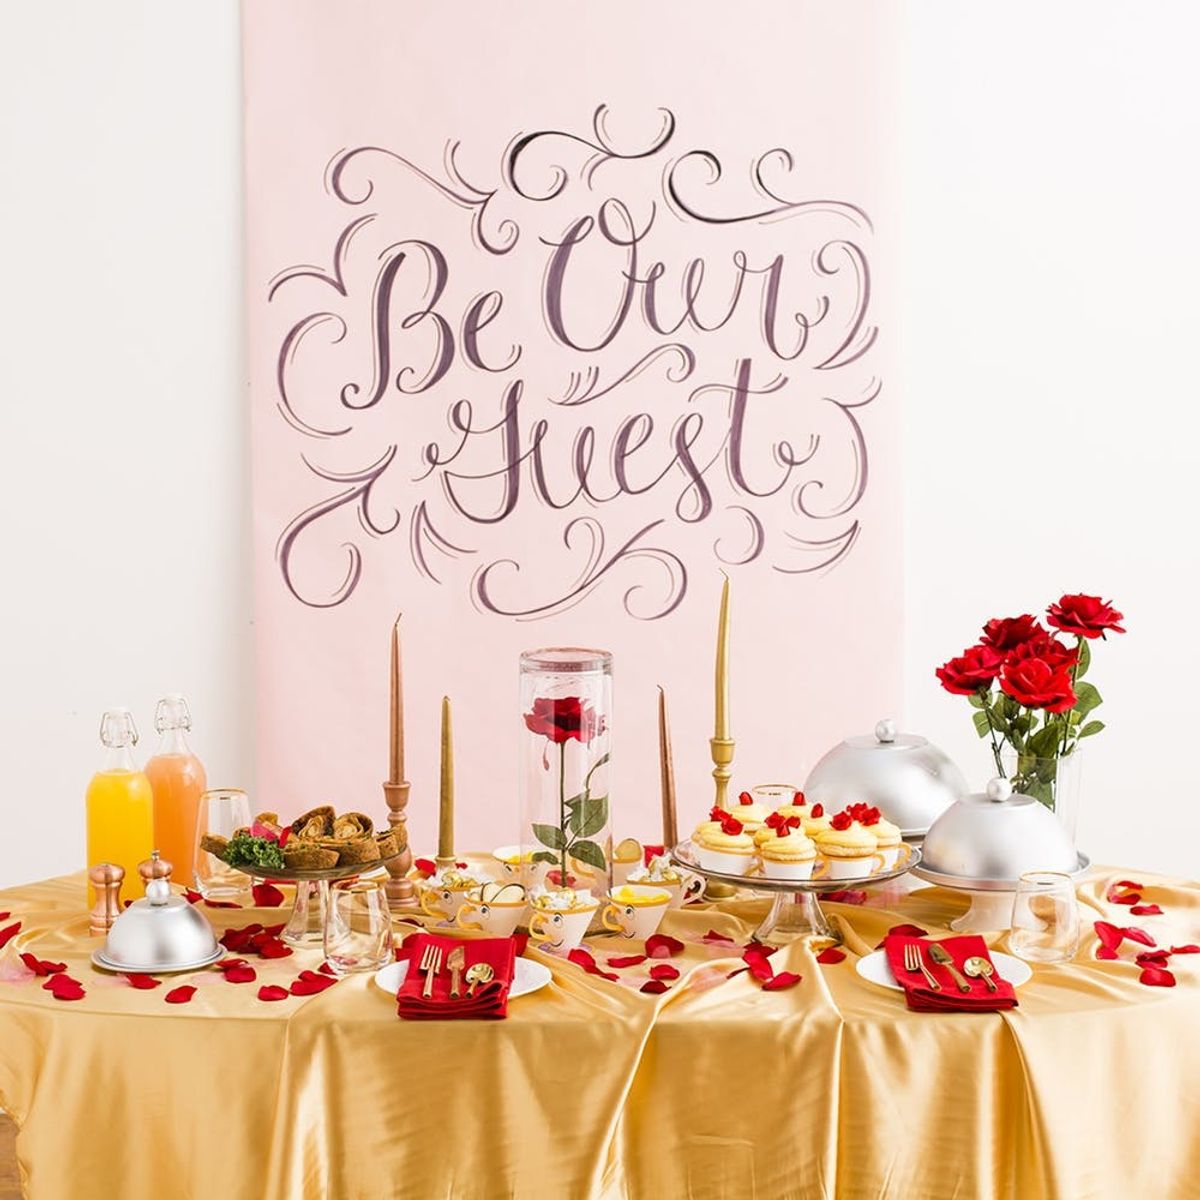 This Beauty and the Beast-Inspired Dinner Party Will Enchant the Entire Family